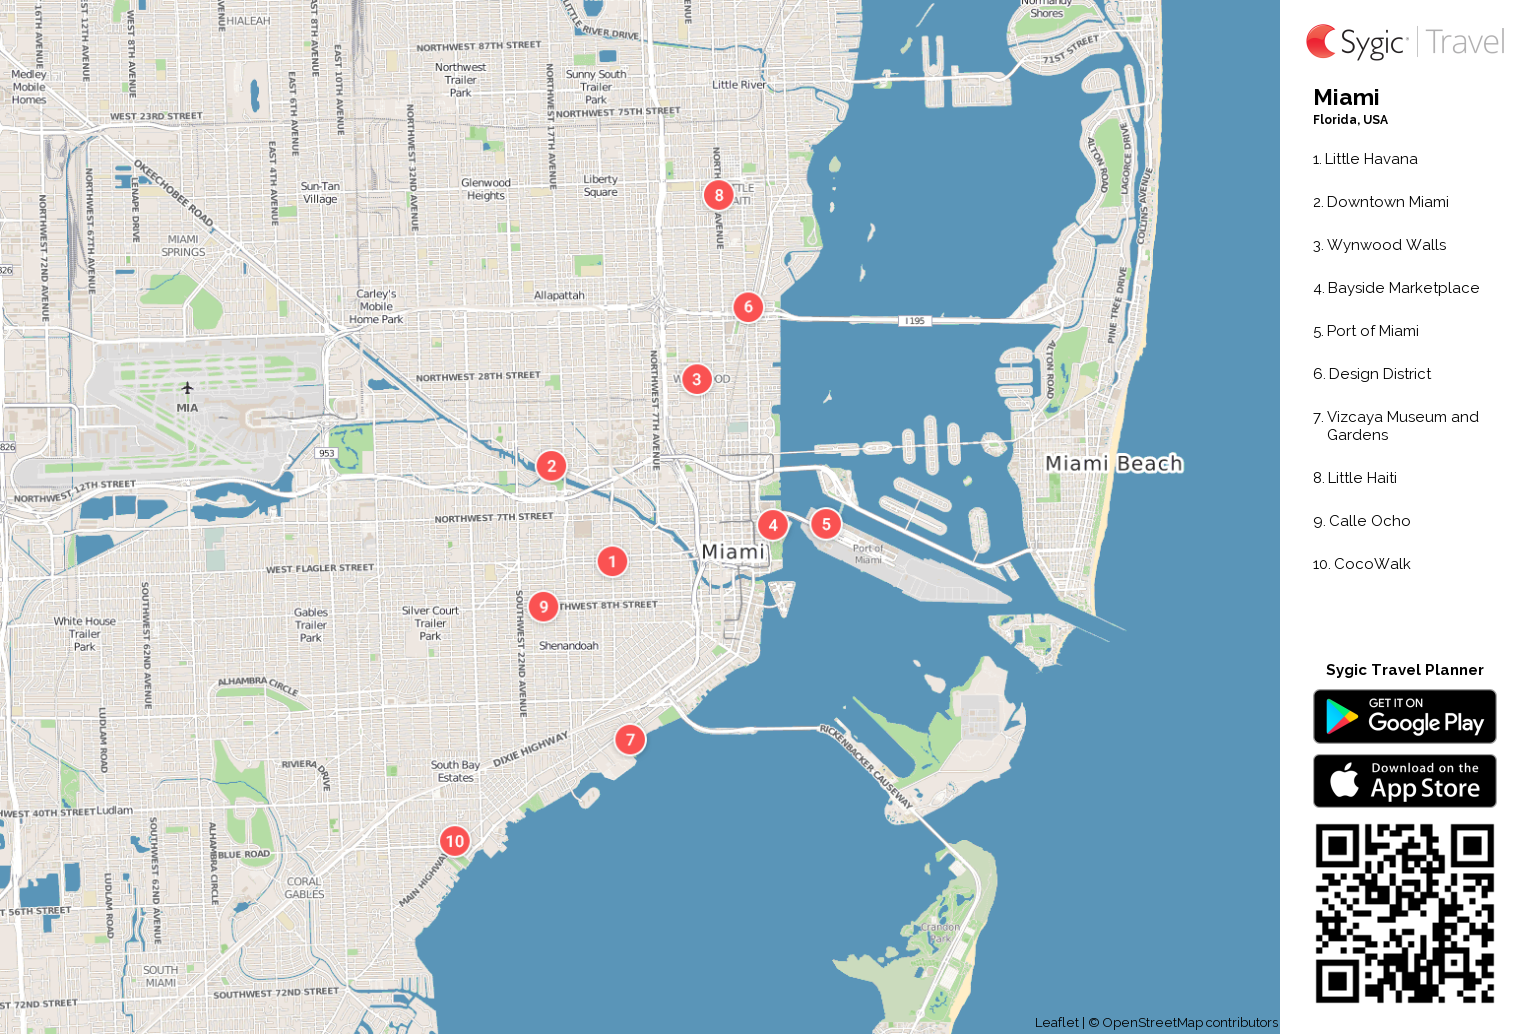 map of downtown miami | living room design 2020